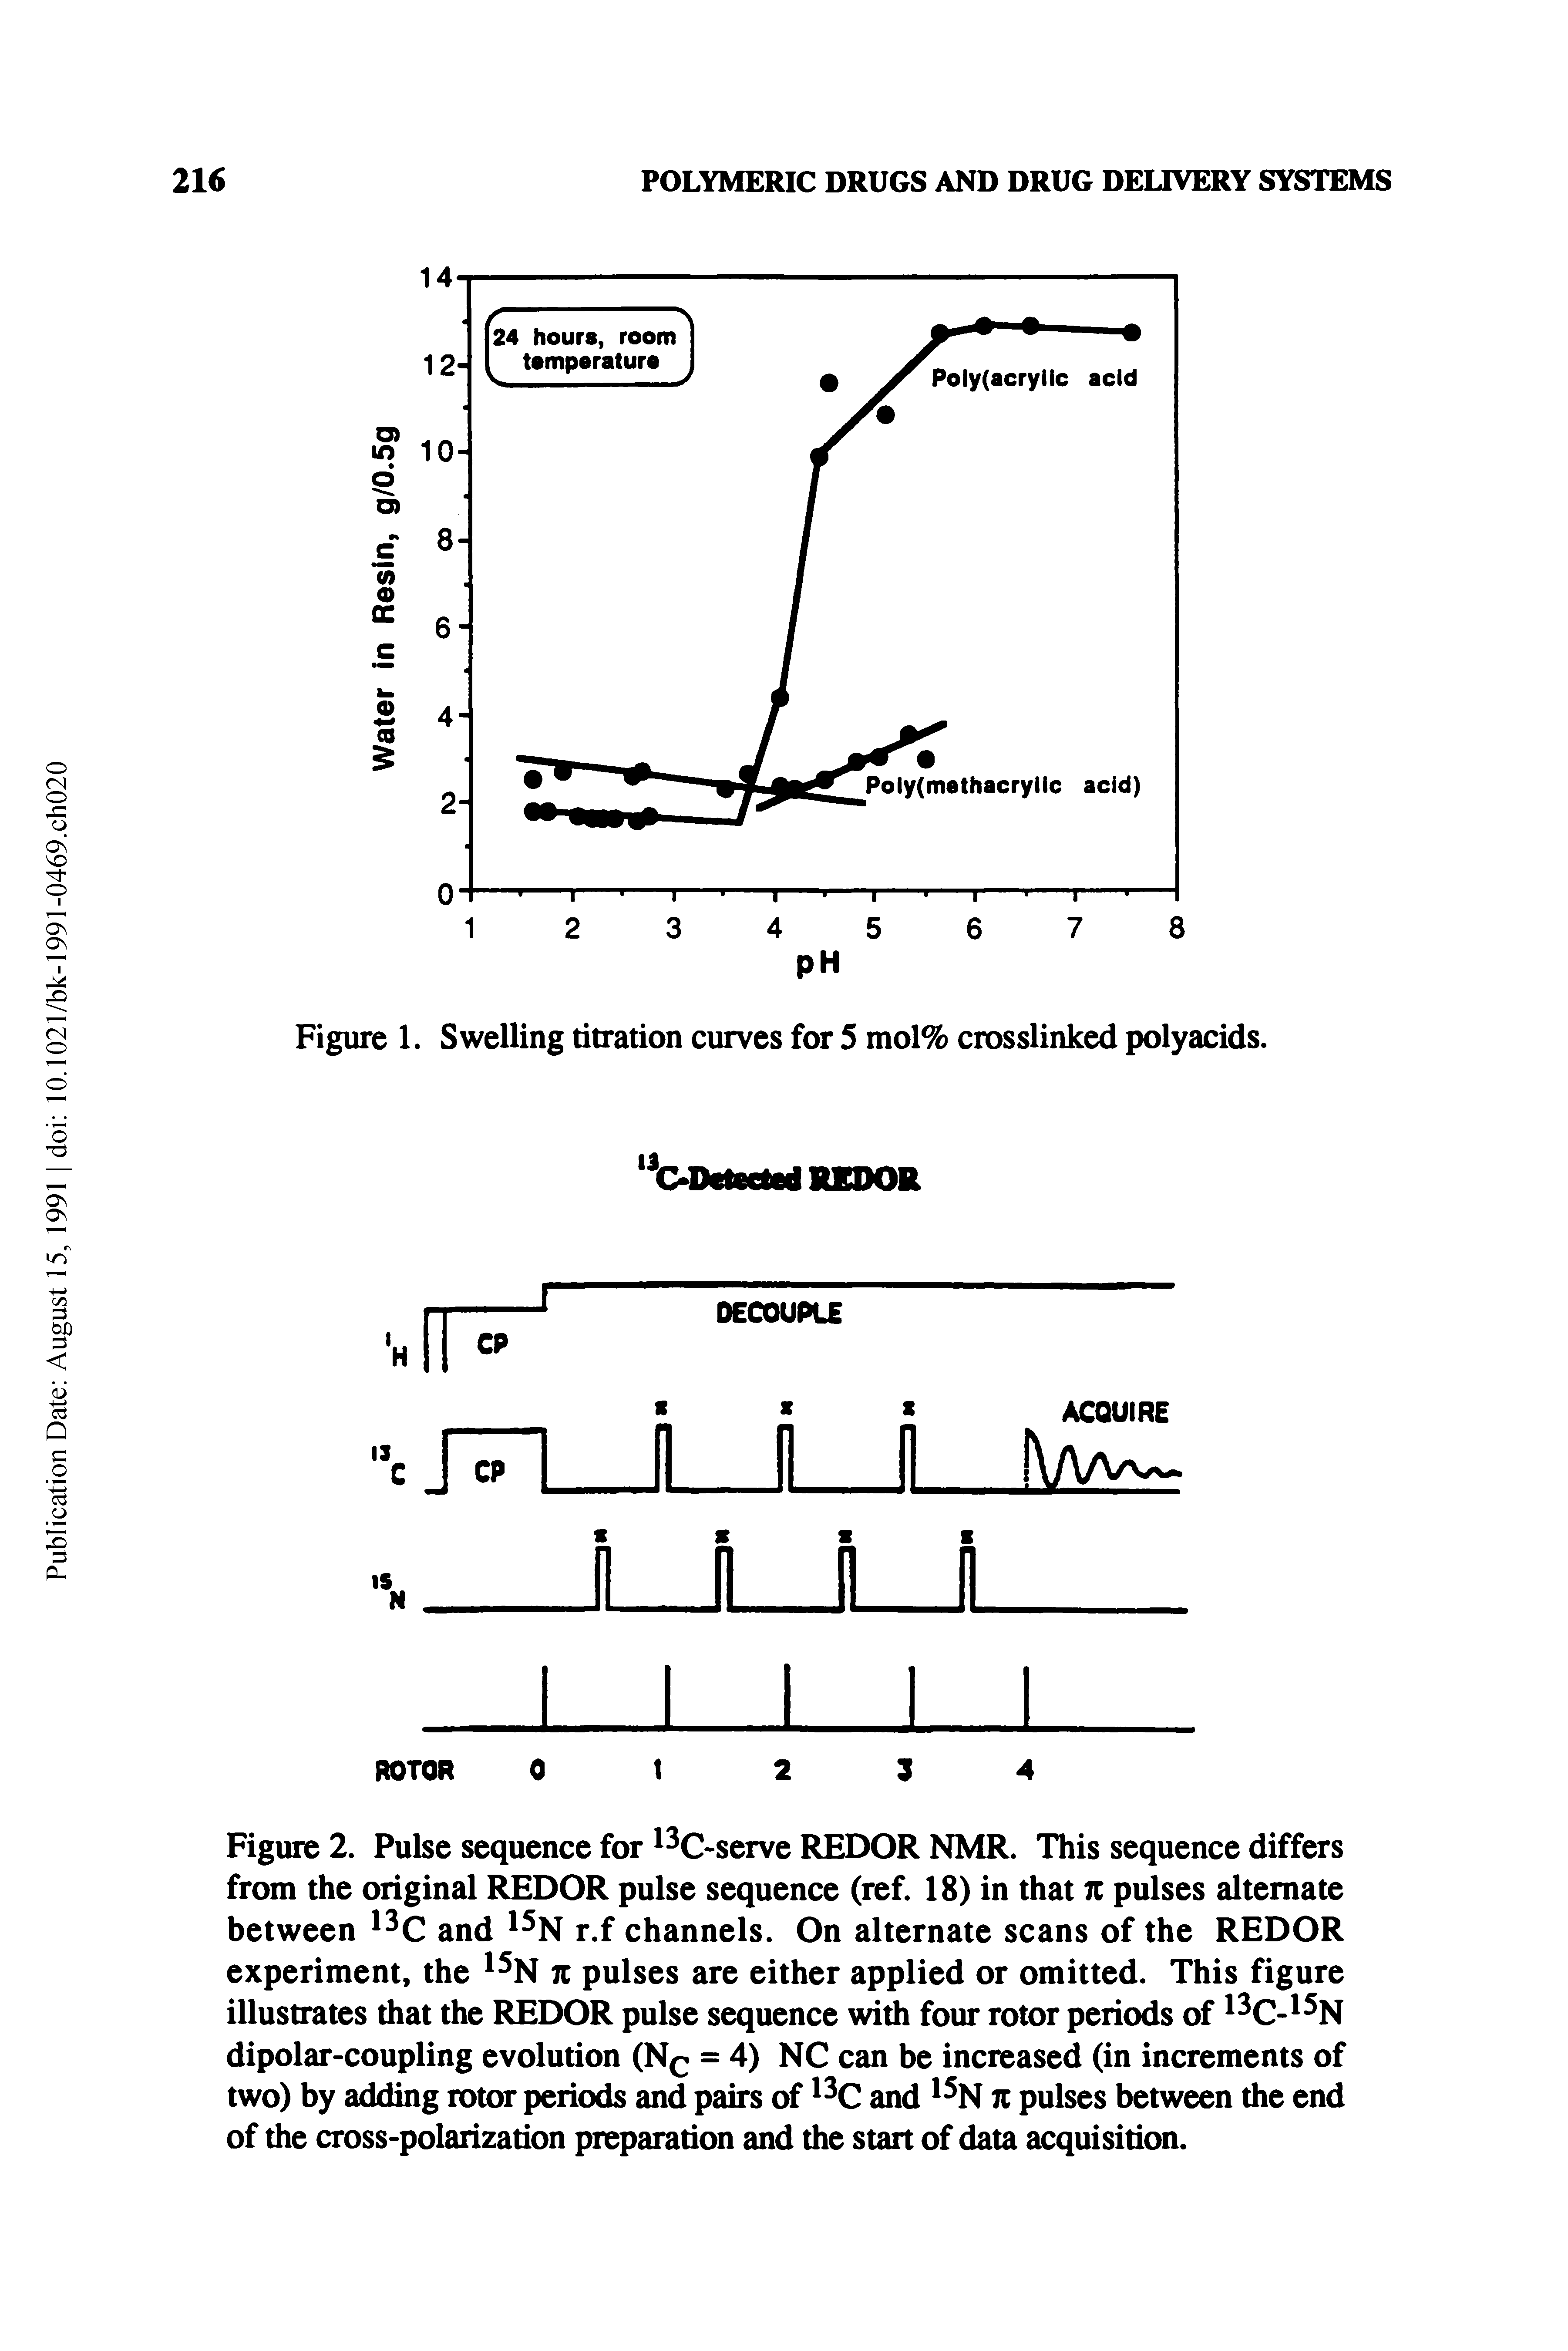 Figure 2. Pulse sequence for 13C-serve REDOR NMR. This sequence differs from the original REDOR pulse sequence (ref. 18) in that n pulses alternate between 13C and 15N r.f channels. On alternate scans of the REDOR experiment, the 15N iz pulses are either applied or omitted. This figure illustrates that the REDOR pulse sequence with four rotor periods of 13C-15N dipolar-coupling evolution (Nc = 4) NC can be increased (in increments of two) by adding rotor periods and pairs of 13C and 15N n pulses between the end of the cross-polarization preparation and the start of data acquisition.